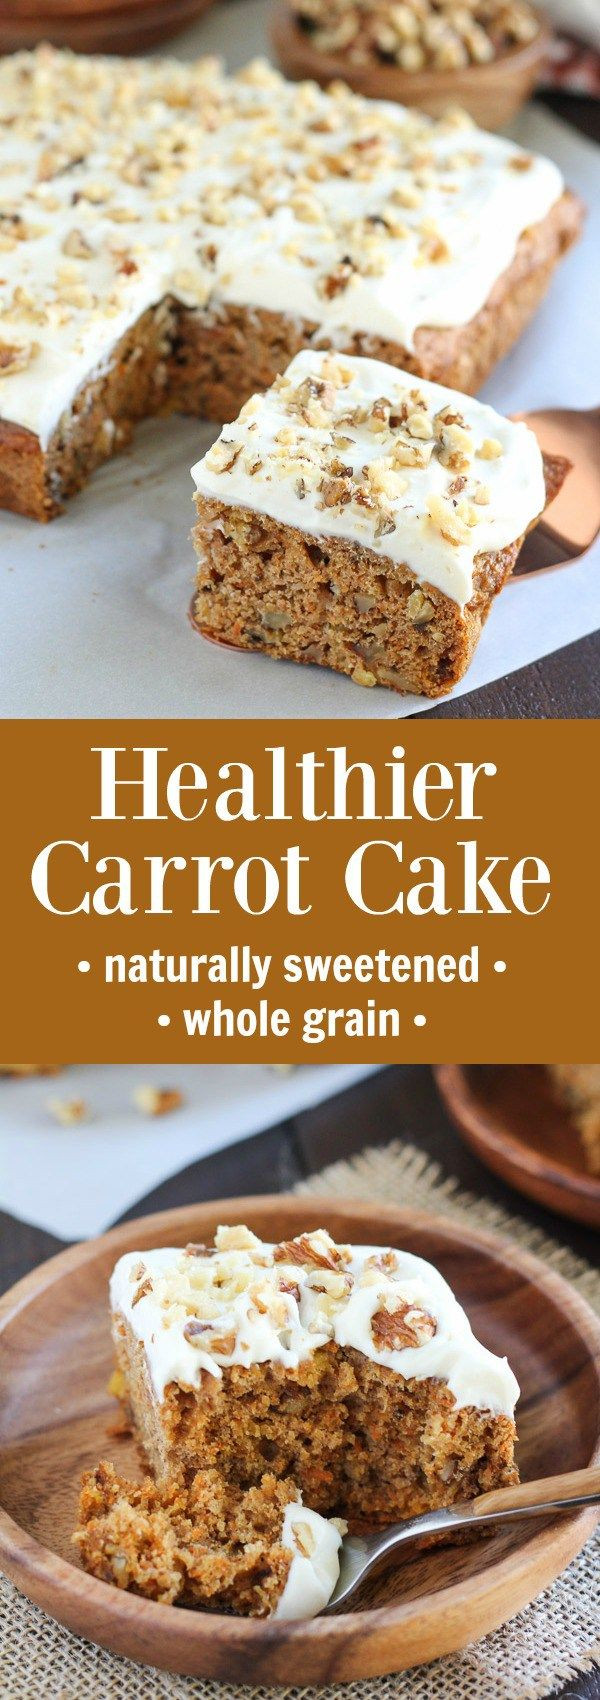 Carrot Cake With Applesauce
 Healthier Carrot Cake Naturally sweetened with honey